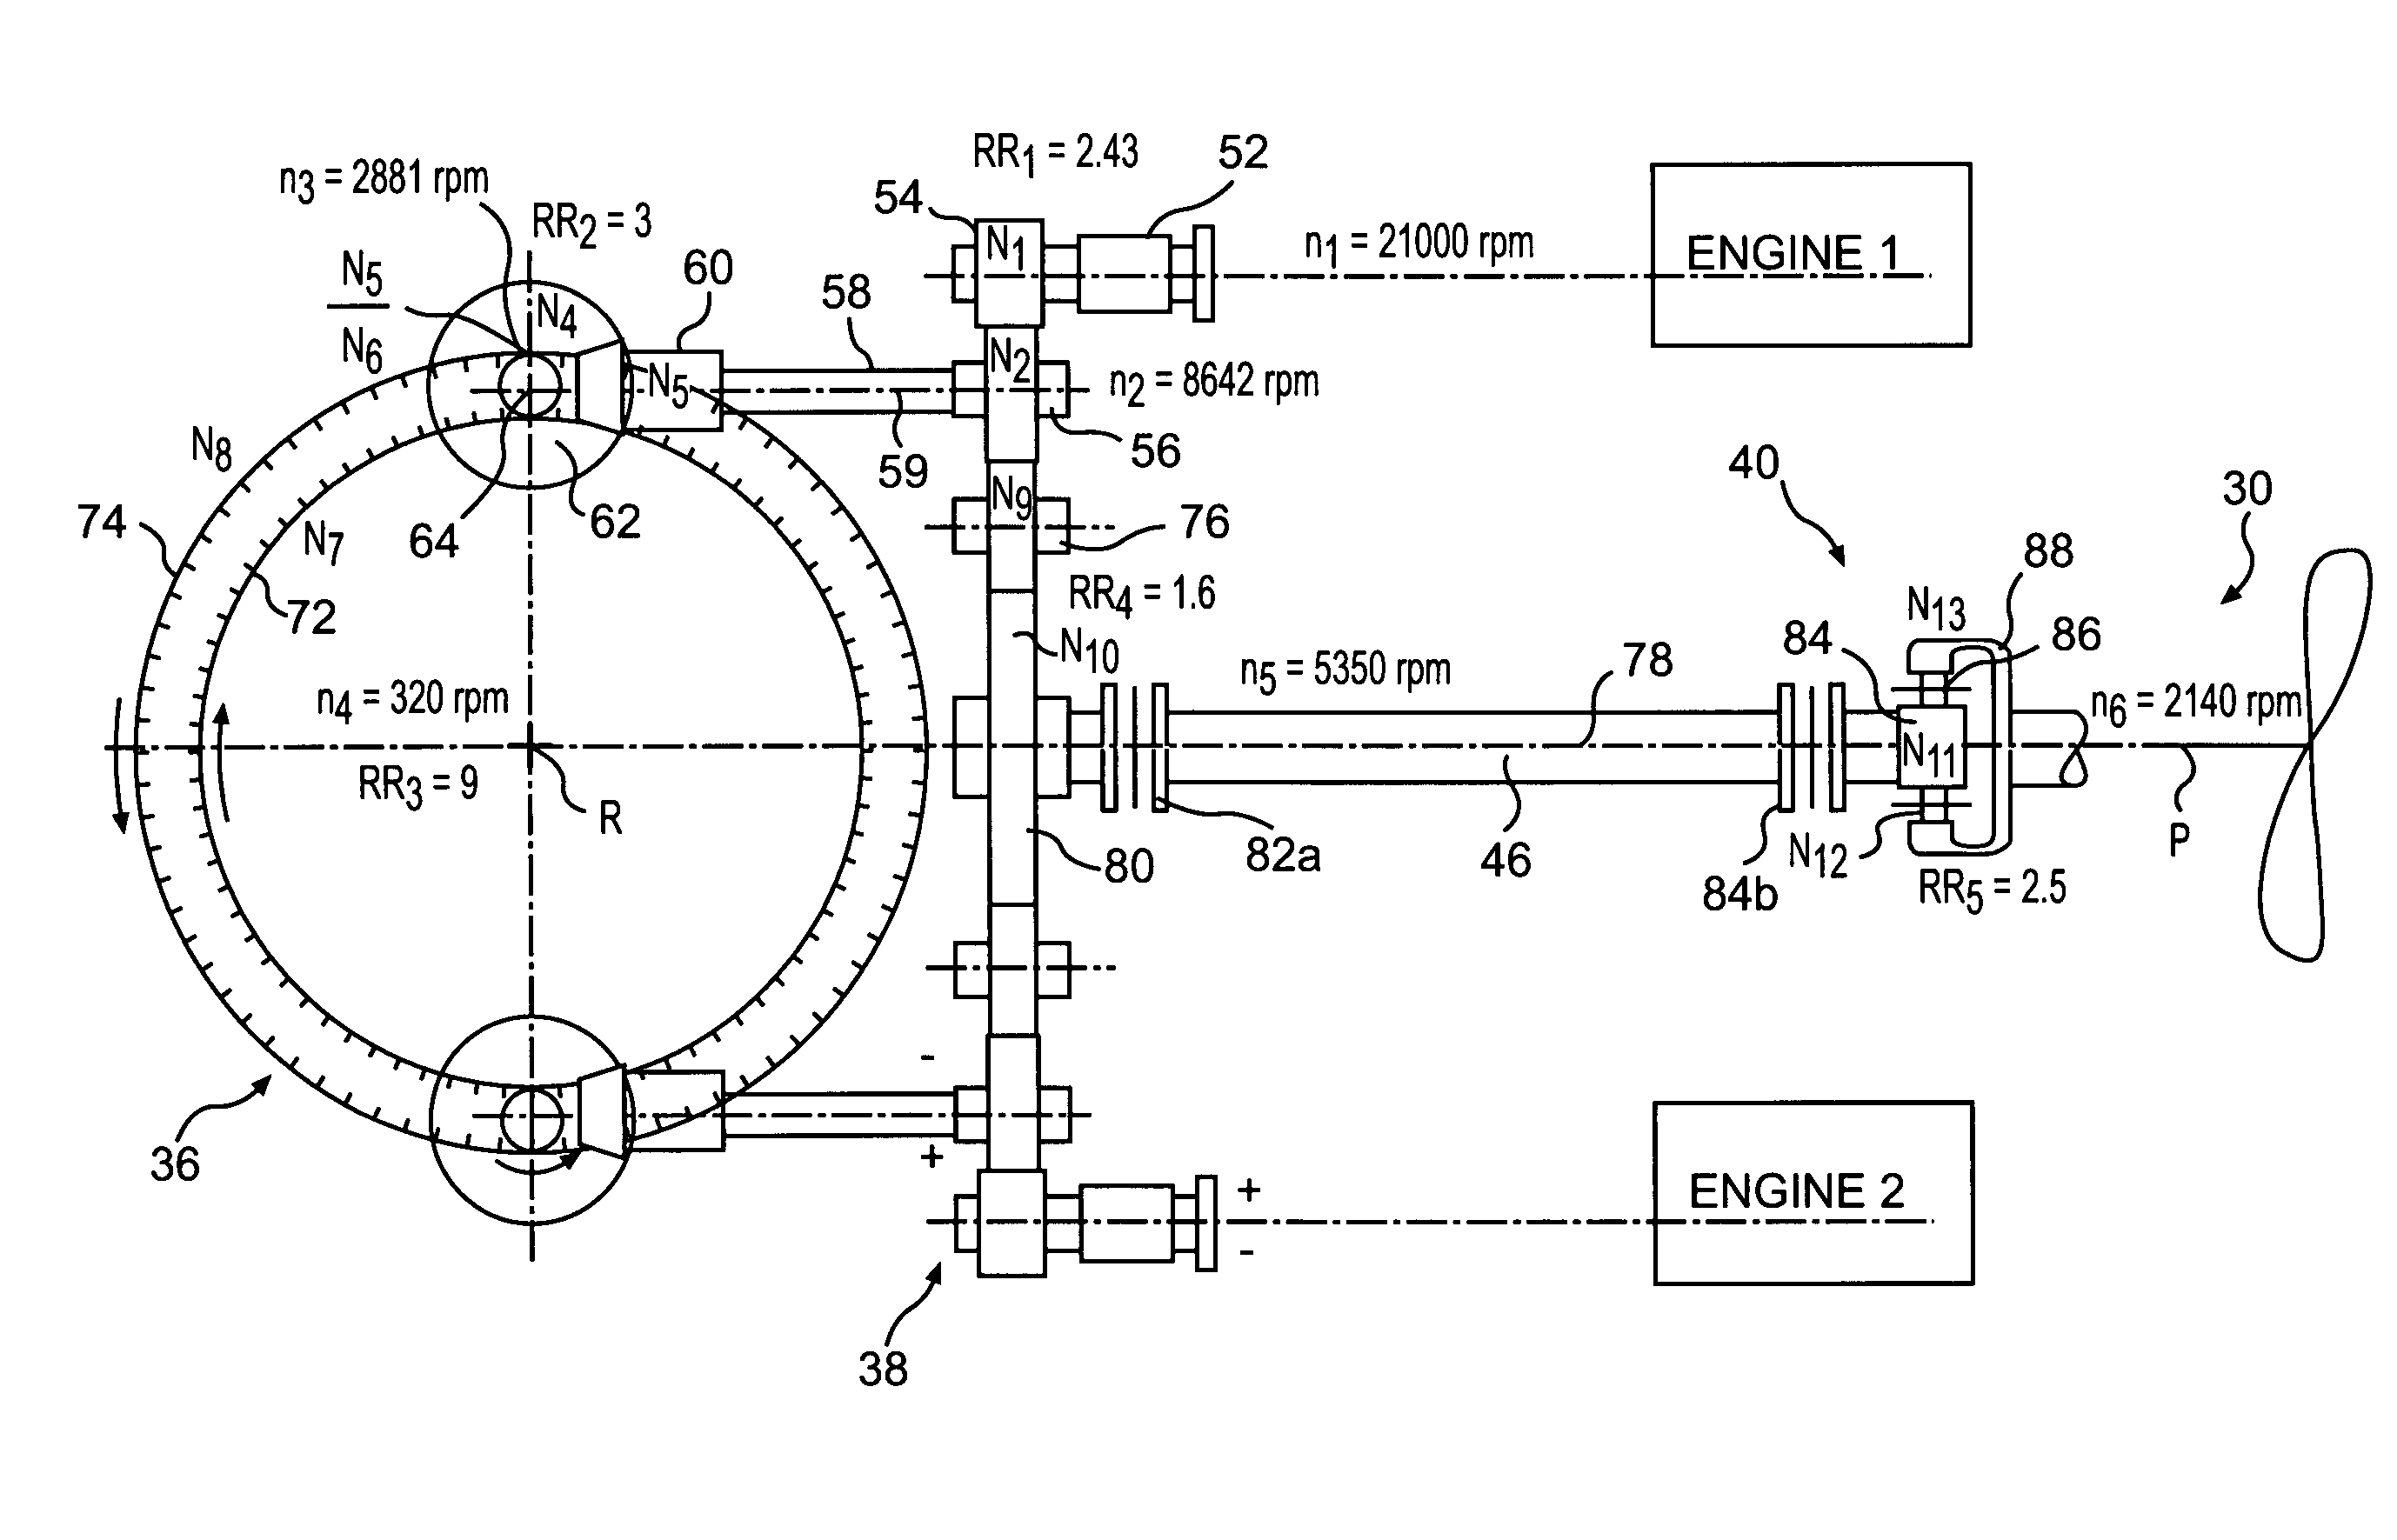 Split torque gearbox for rotary wing aircraft with translational thrust system